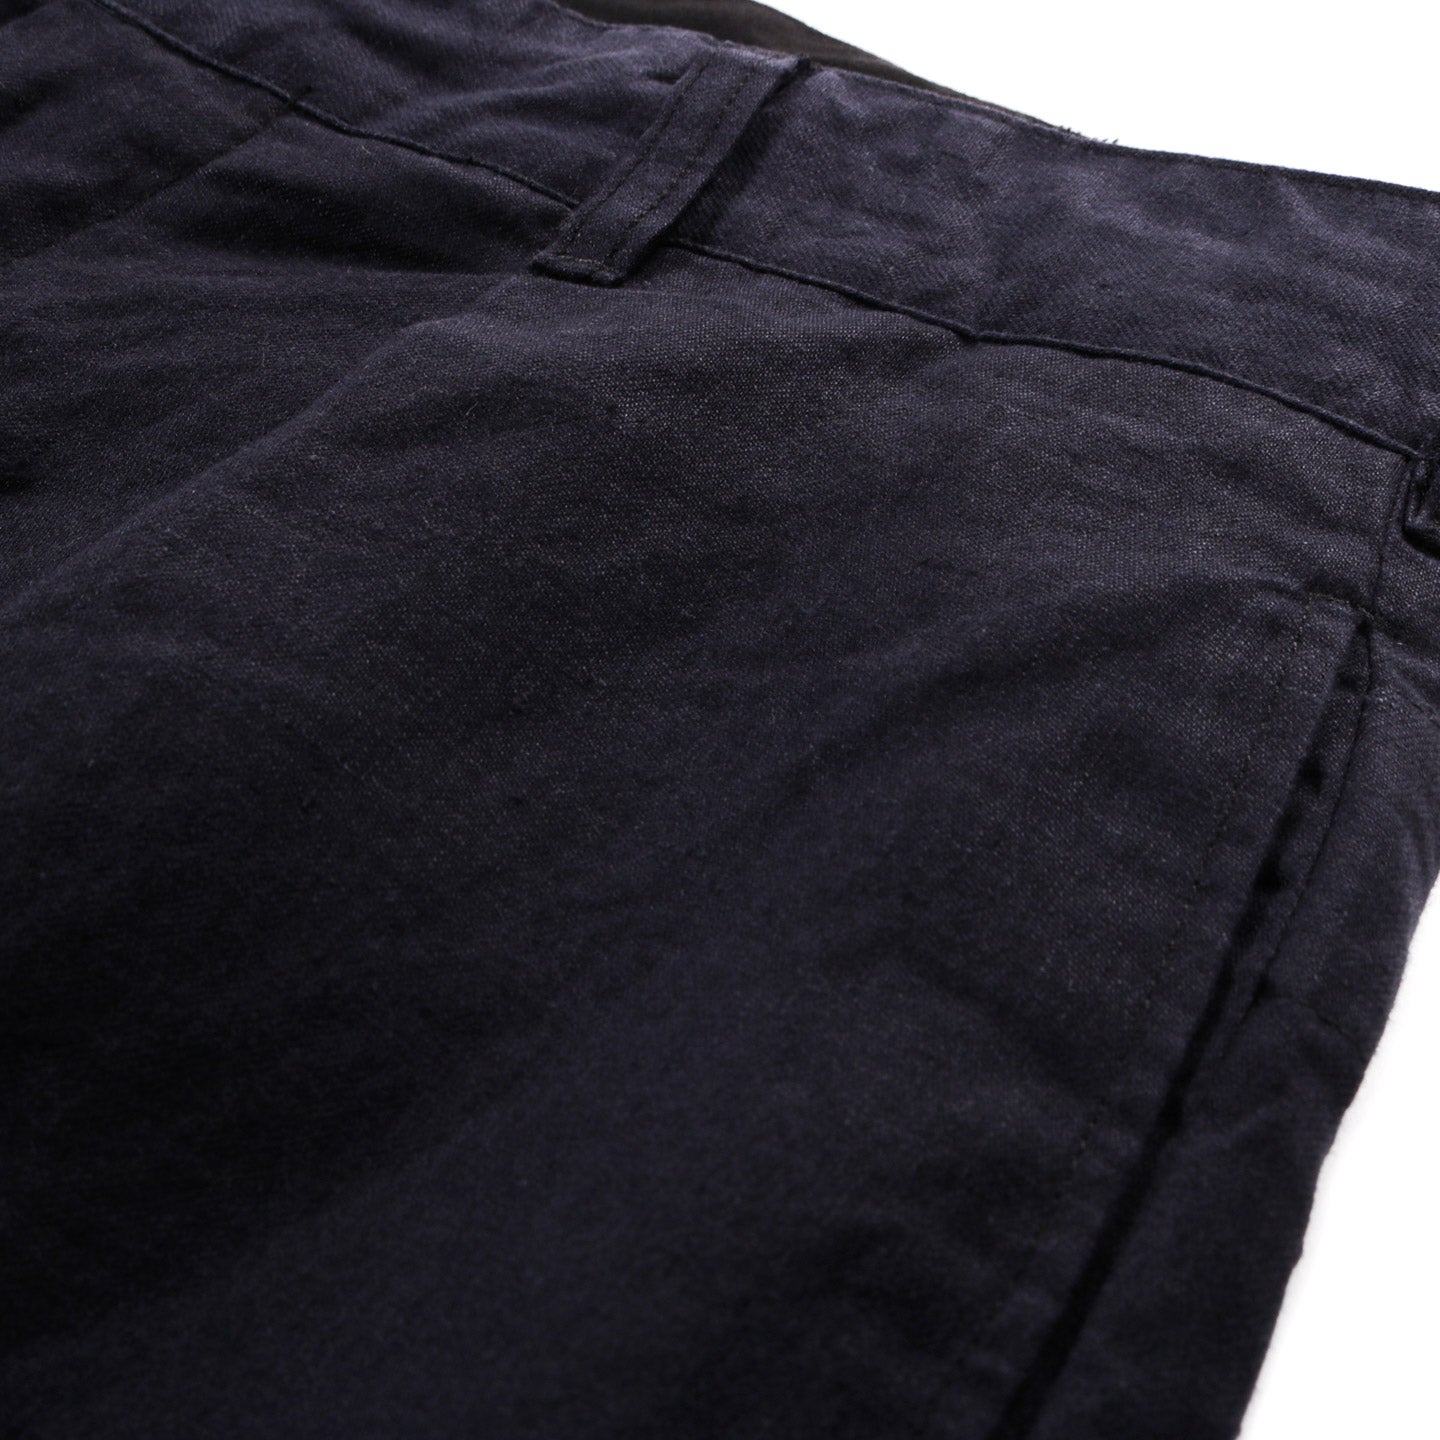 ENGINEERED GARMENTS CARLYLE PANT NAVY LINEN TWILL